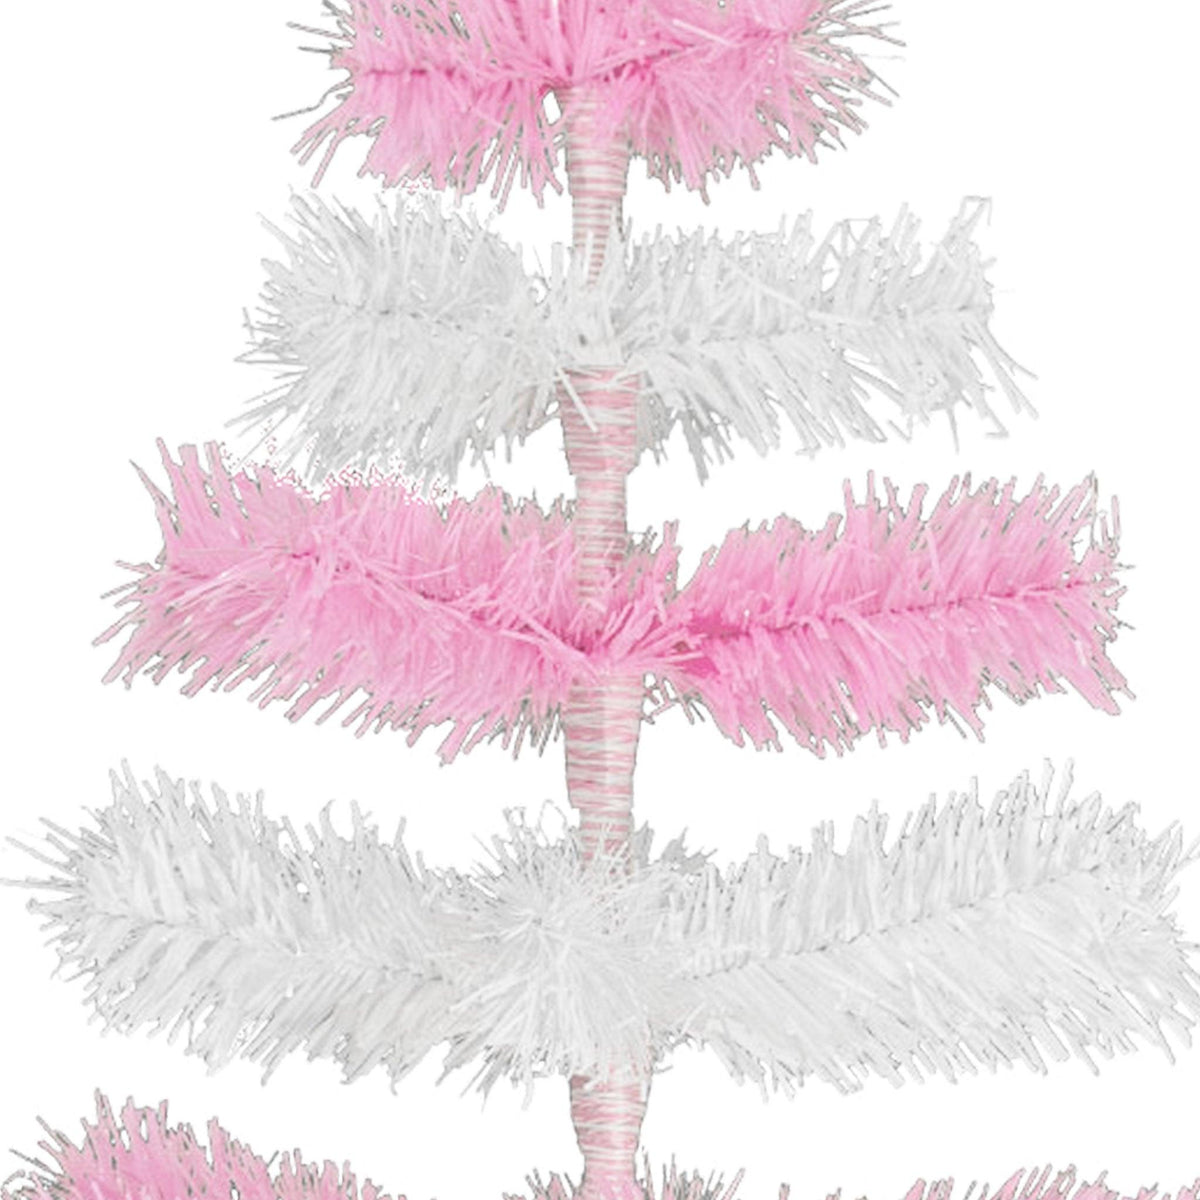 Pink & White Layered Tinsel Christmas Trees! Decorate for the holidays with a Shiny Pink and Matte White retro-style Christmas Tree. Incorporate a little purple and white into your holiday decorations this year. On sale at leedisplay.com